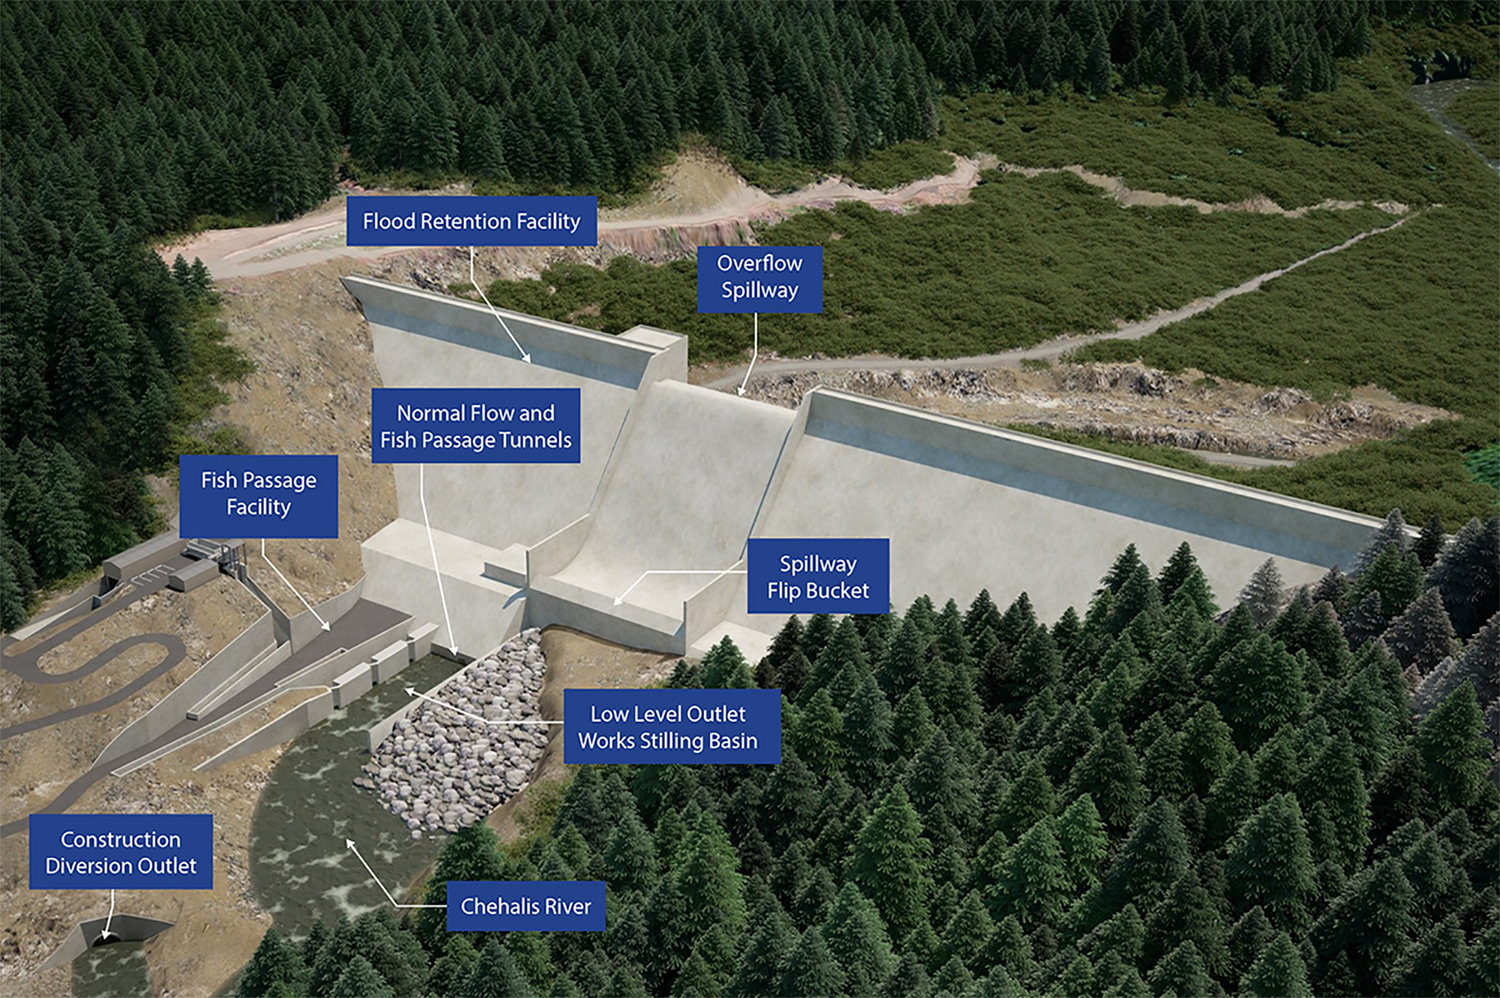 This illustration shows what the proposed Chehalis River dam near Pe Ell will look like under normal conditions, allowing the river to run without impediment.